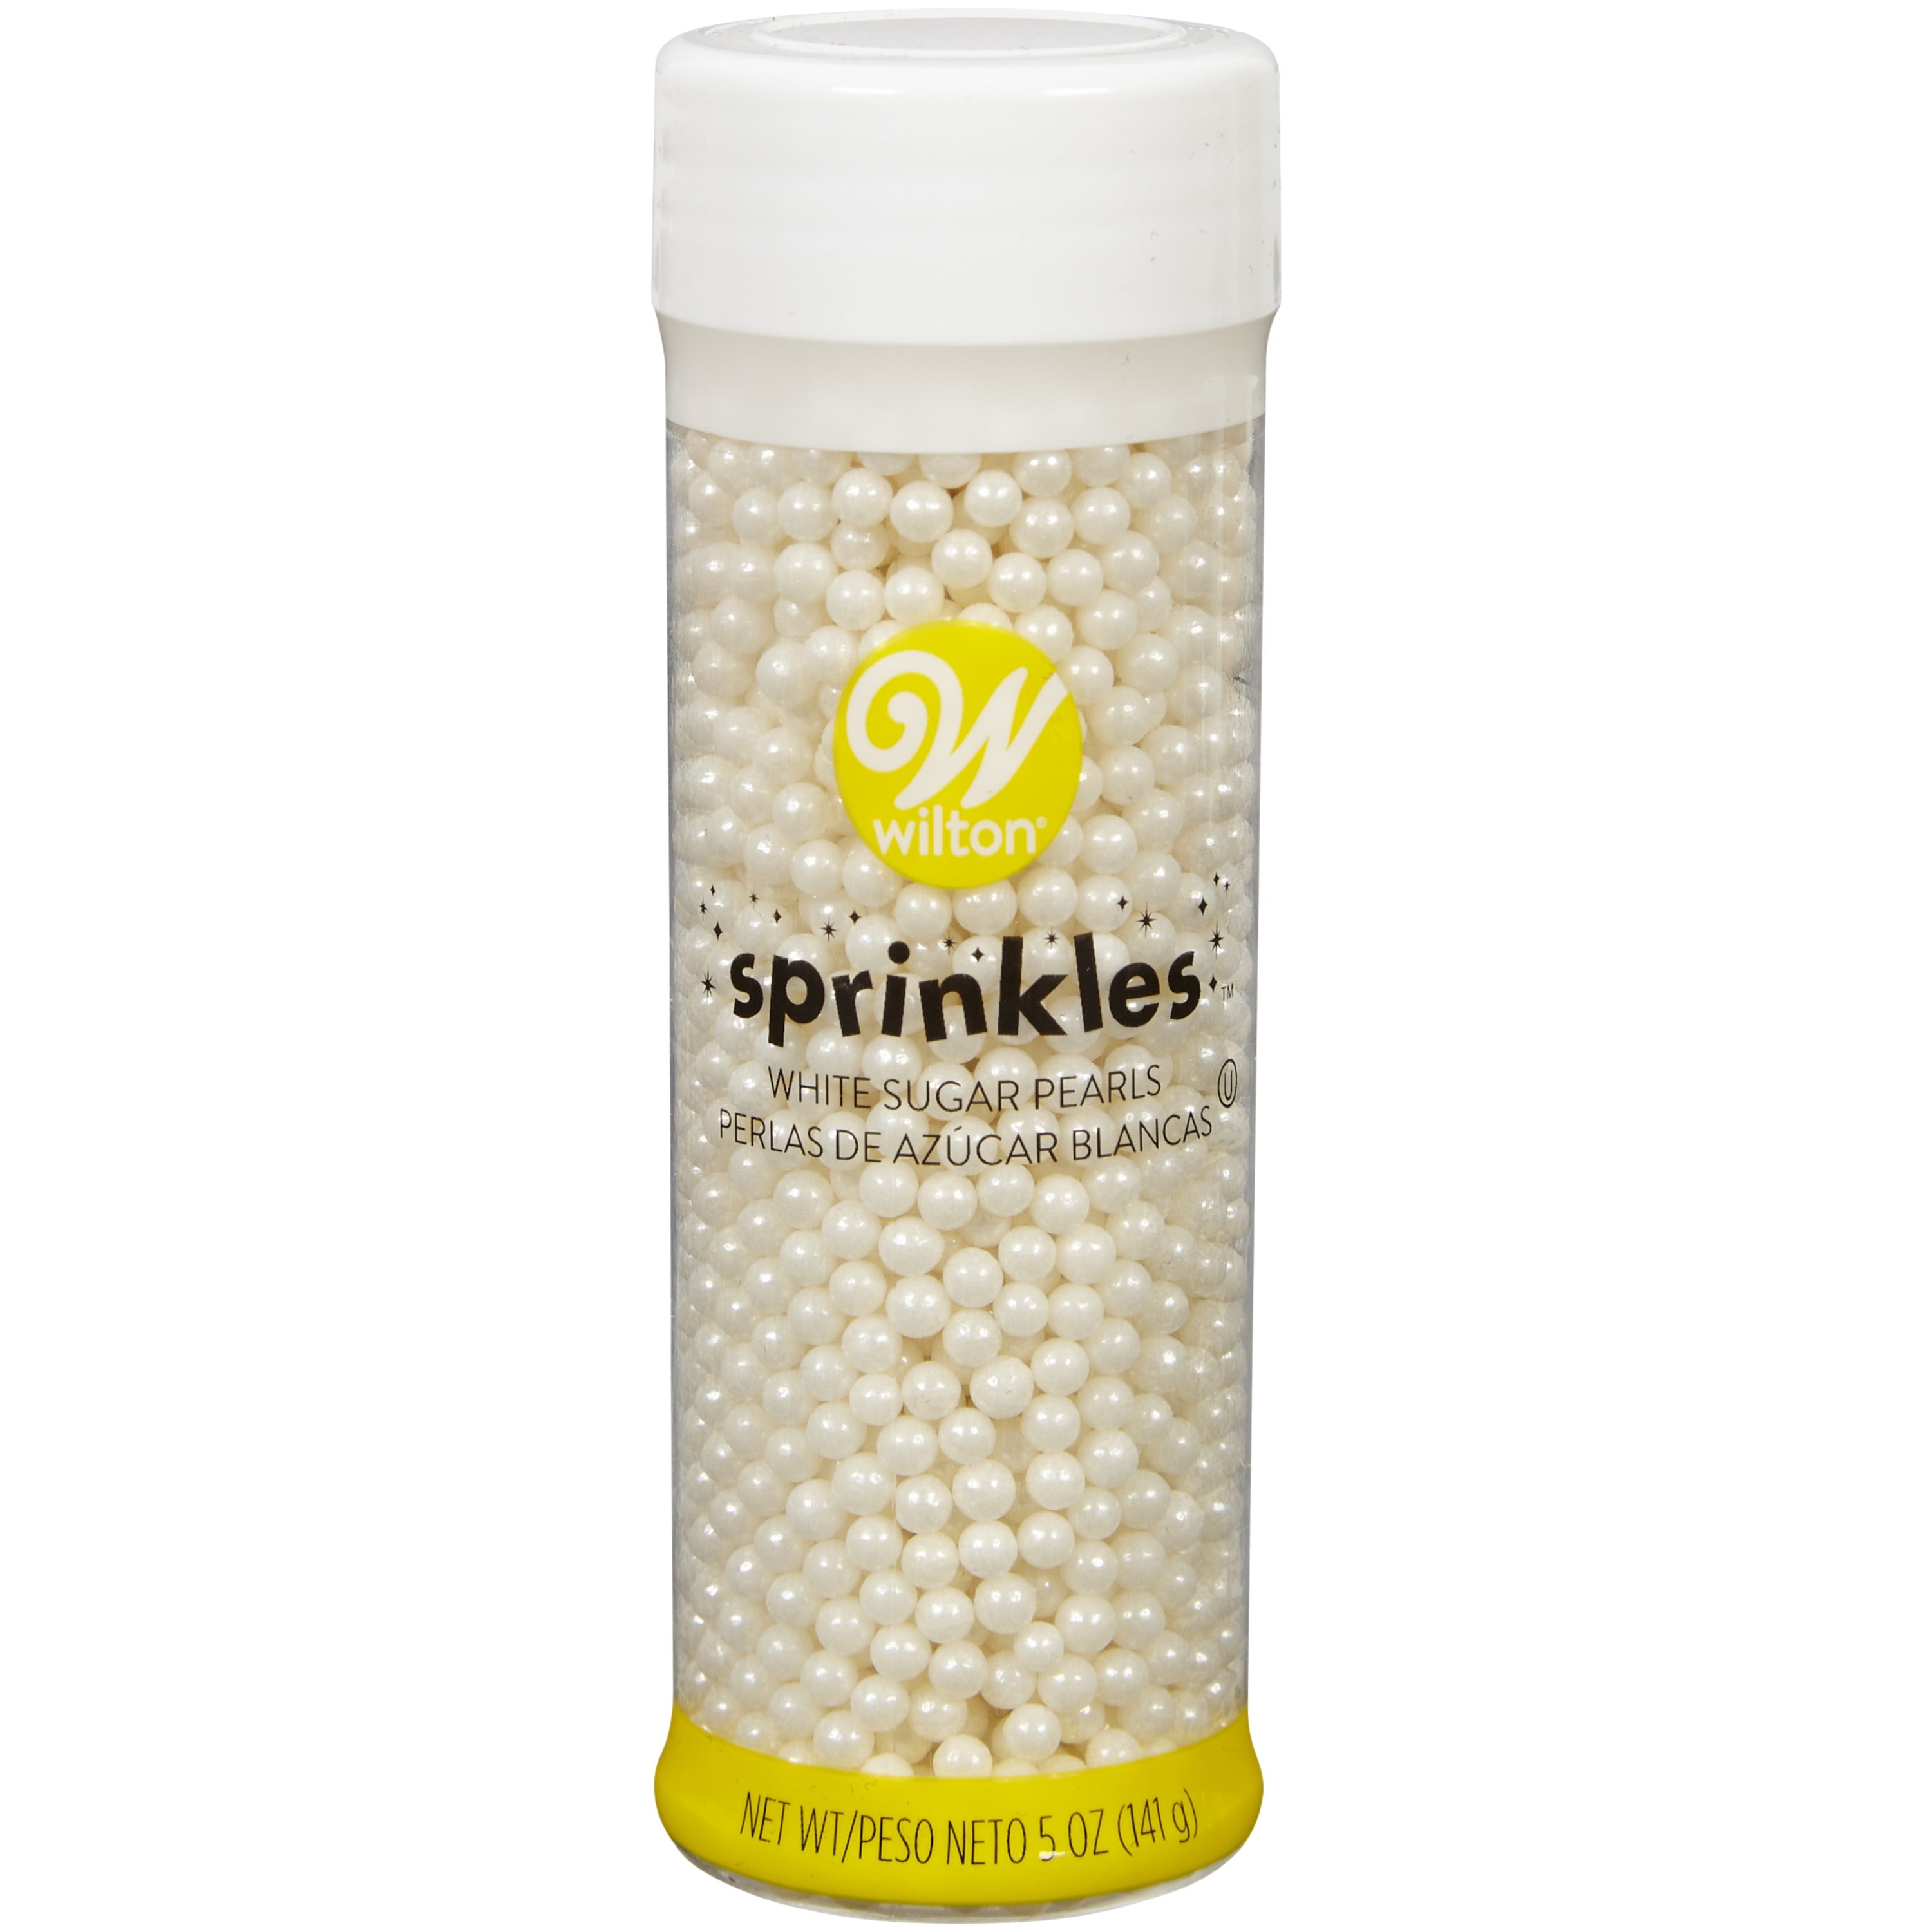 O'Creme Ivory Edible Sugar Pearls Cake Decorating Supplies for Bakers:  Cookie, Cupcake & Icing Toppings, Beads Sprinkles For Baking, Kosher  Certified, Candy Sugar Ball Accents 4mm, 16 Oz 